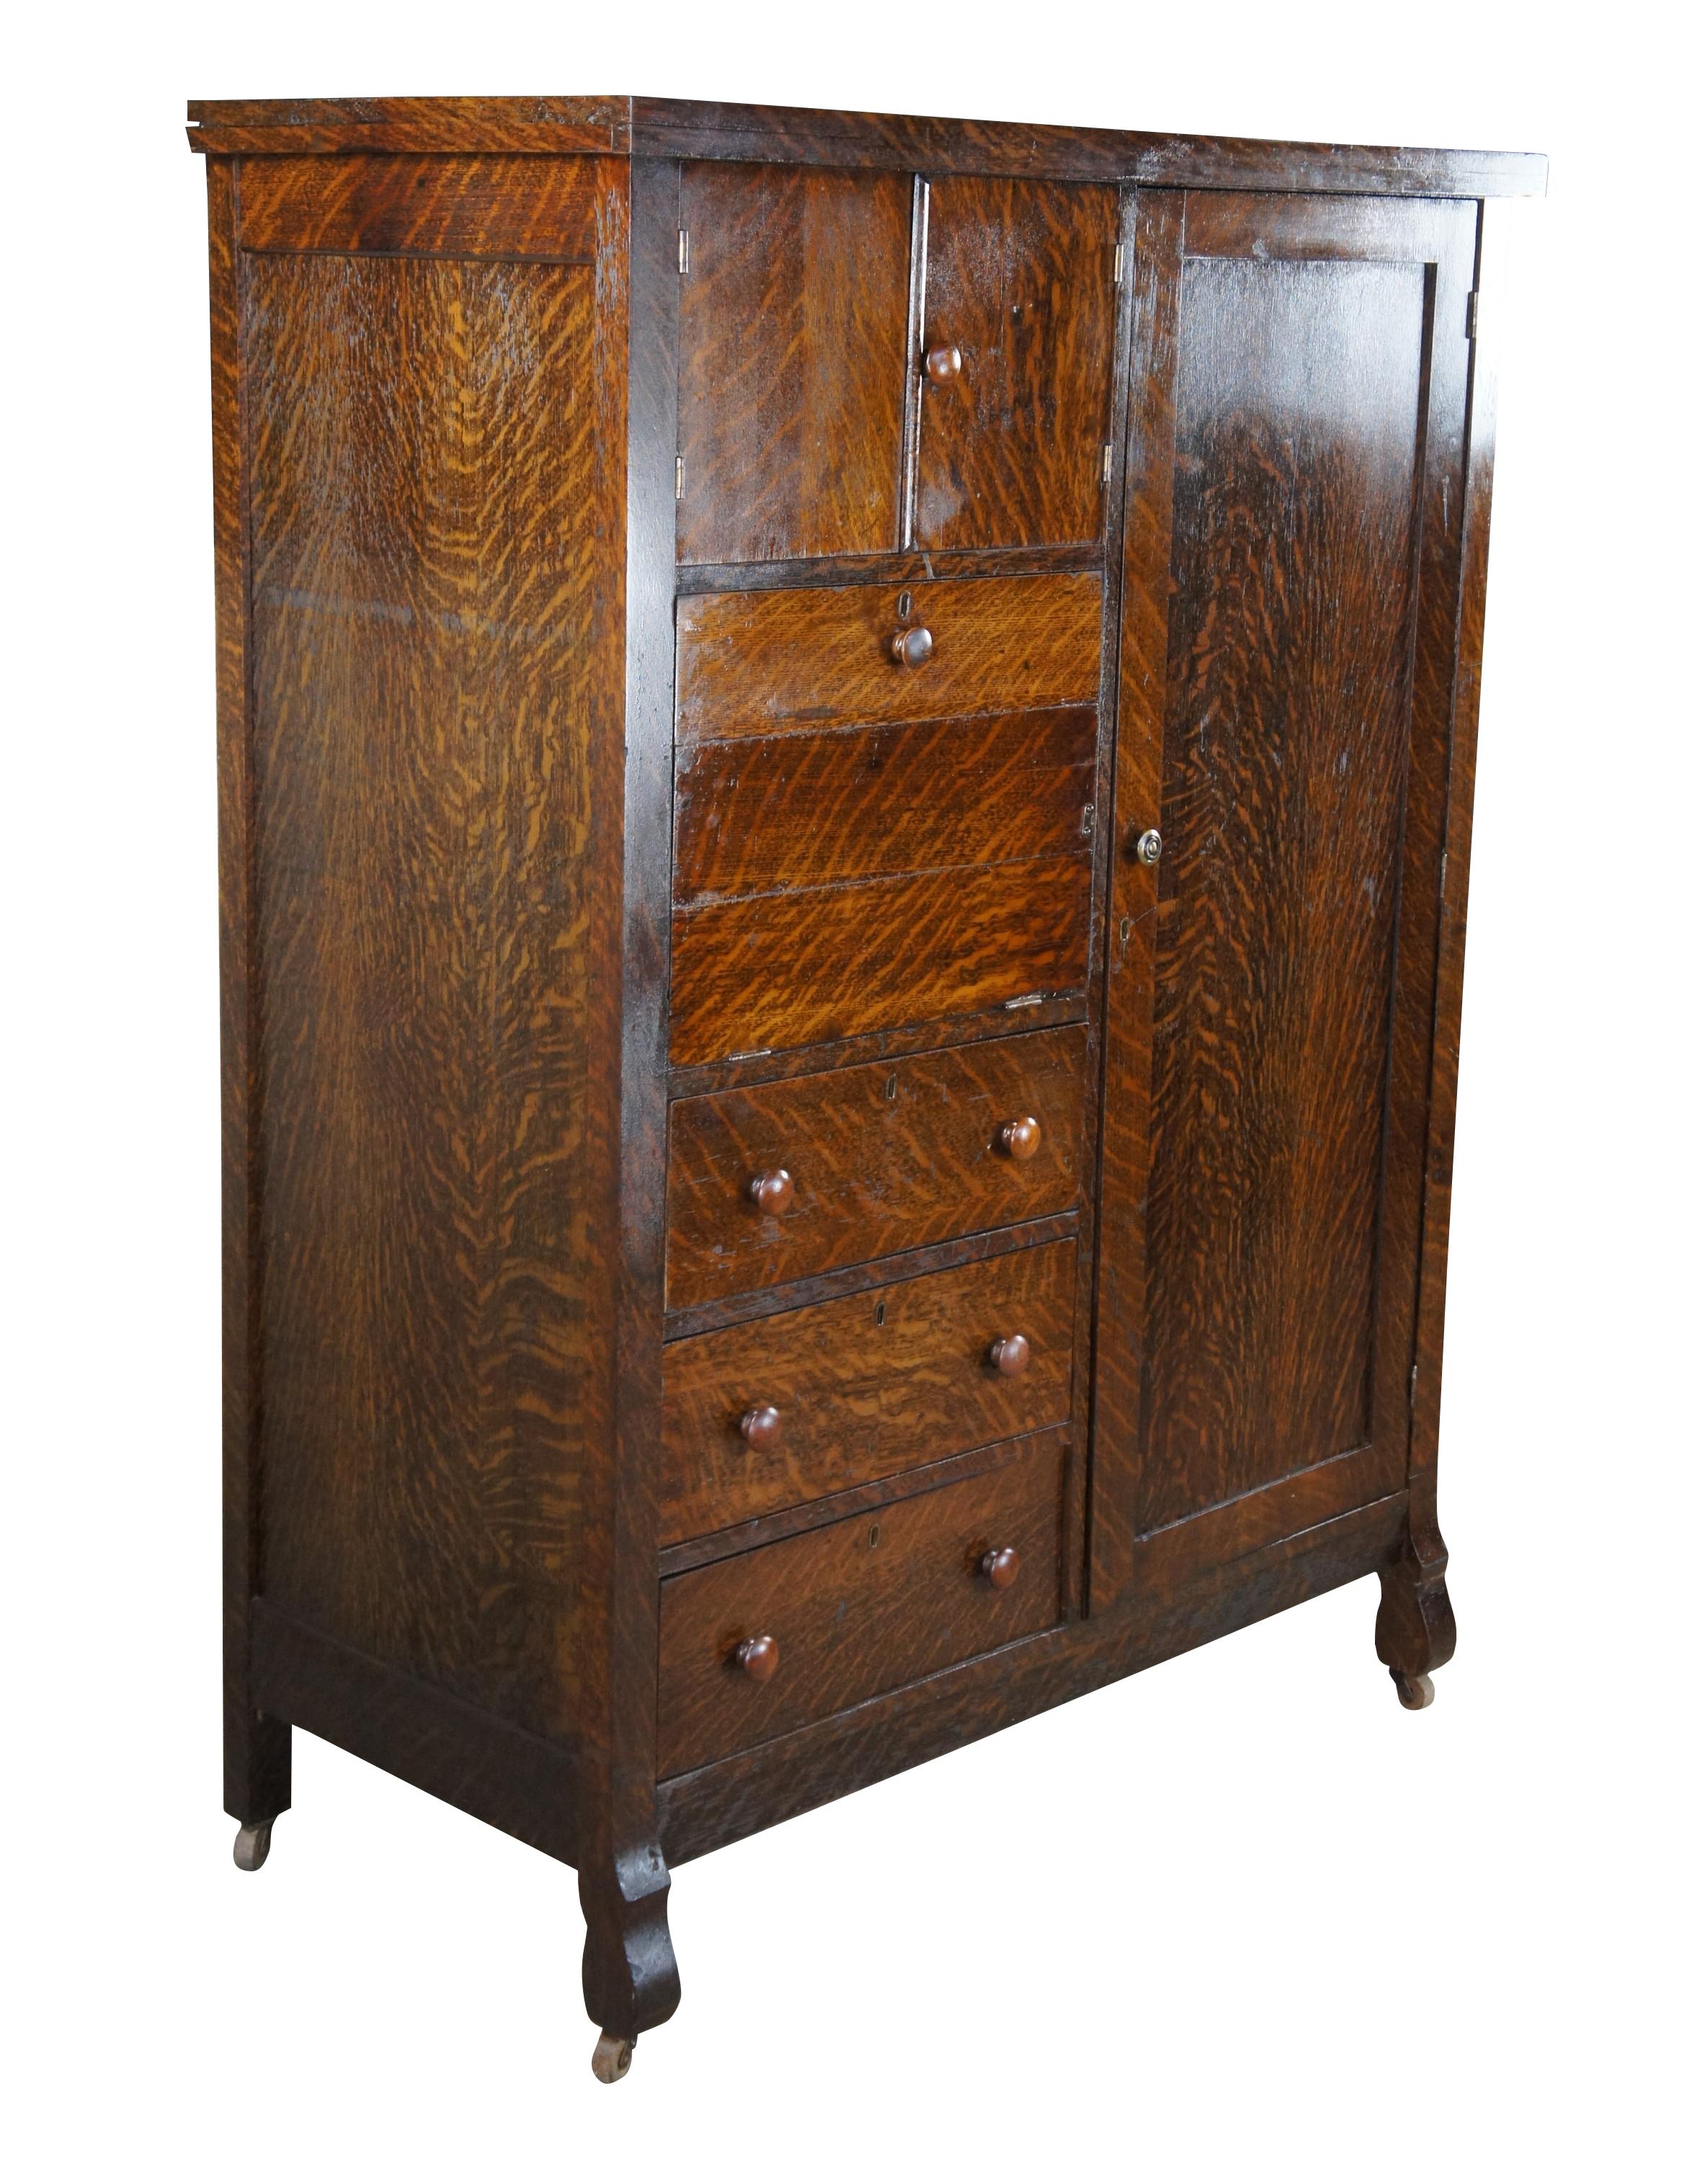 Antique multi function chifferobe armoire / secretary writing desk / dresser cabinet.  Made of quartersawn oak featuring hanging armoire, sloped secretary writing desk with cubbies / letter slots and drawer, upper cabinet and three lower dresser